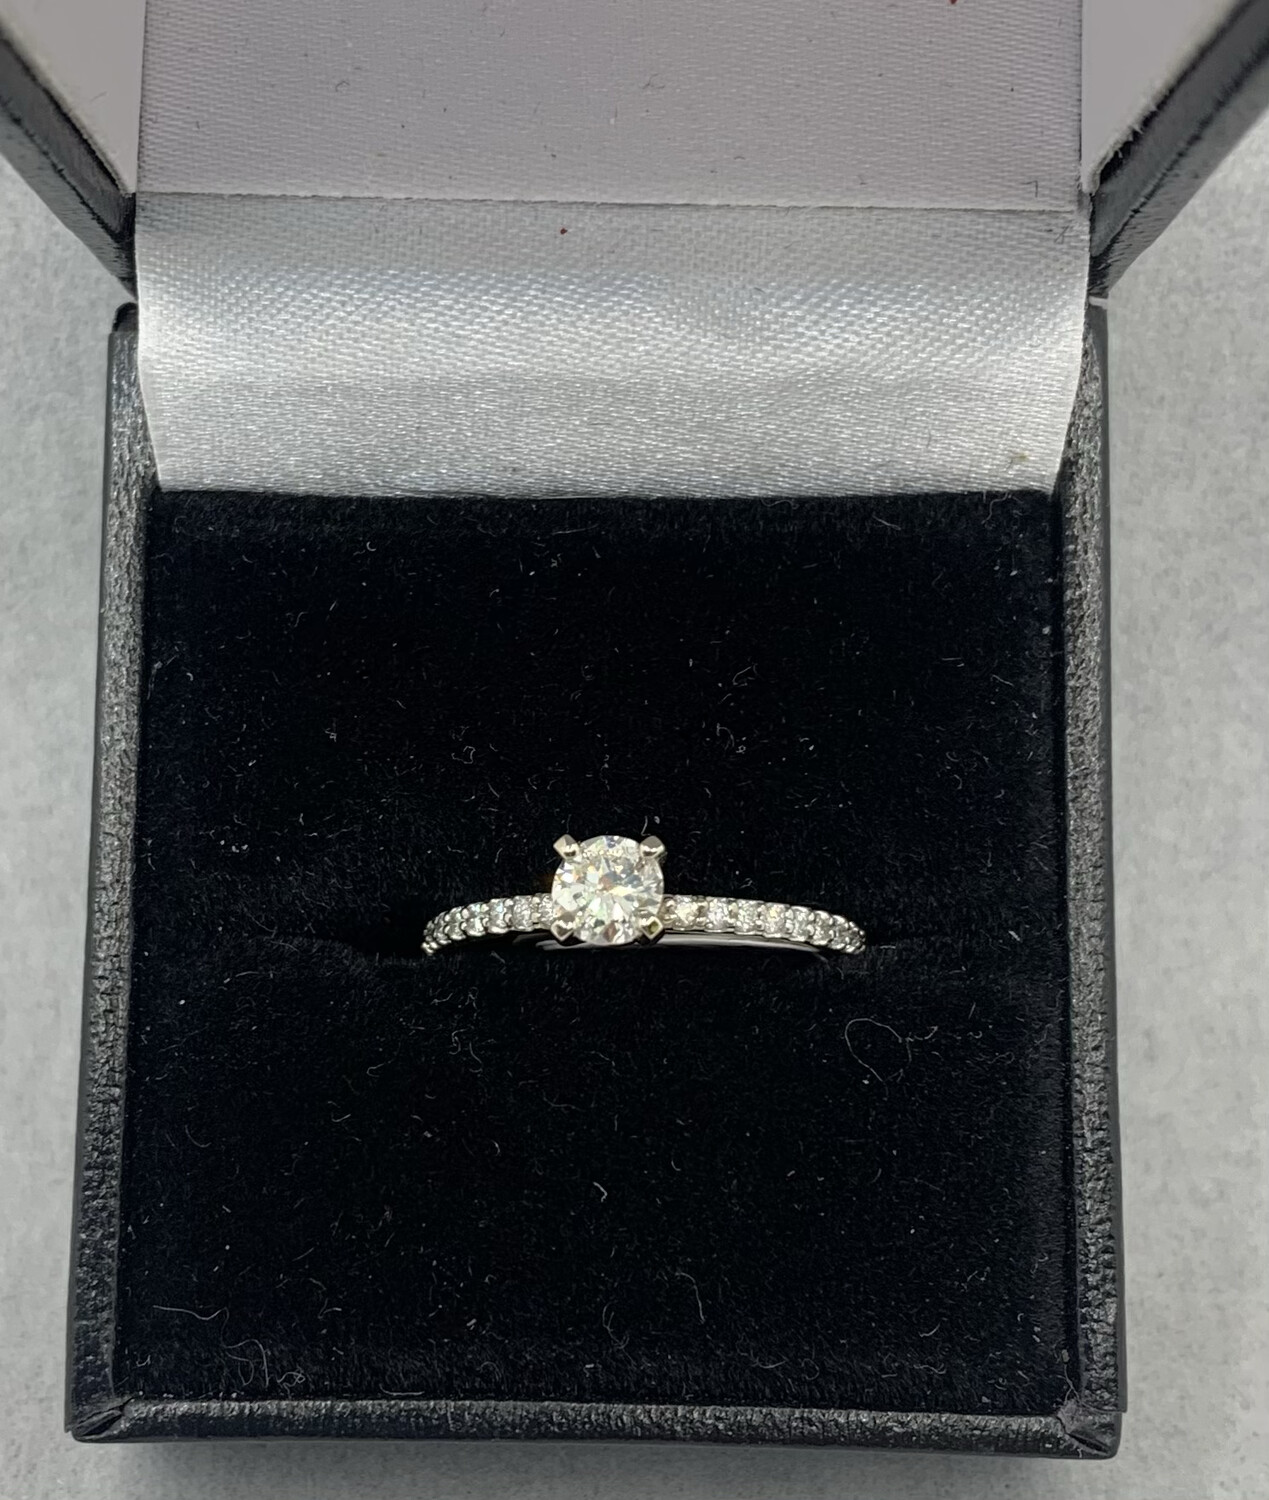 Diamond Engagement Ring Brilliant Center with Diamond Accents (63 Pts. Total Weight) set in 14 Kt. White Gold